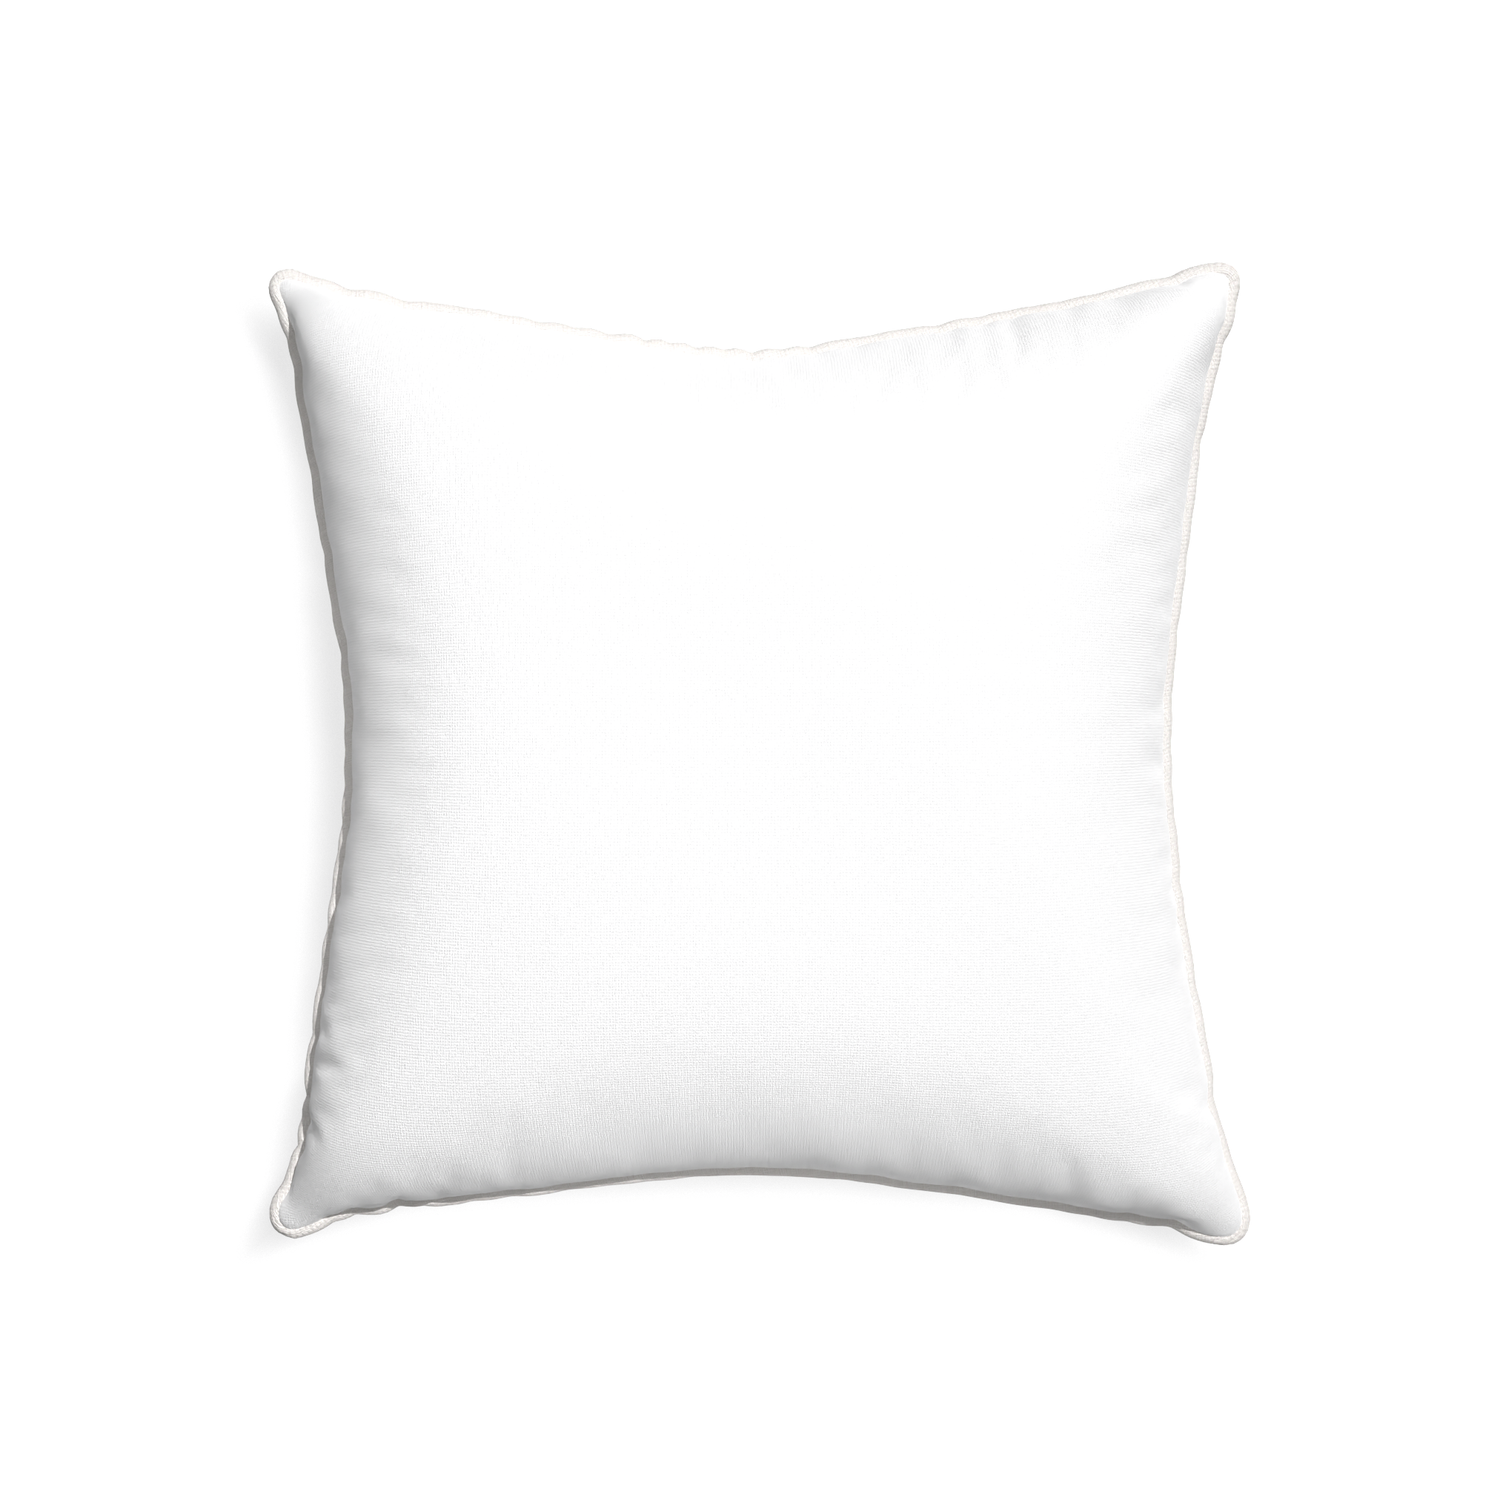 22-square snow custom pillow with snow piping on white background